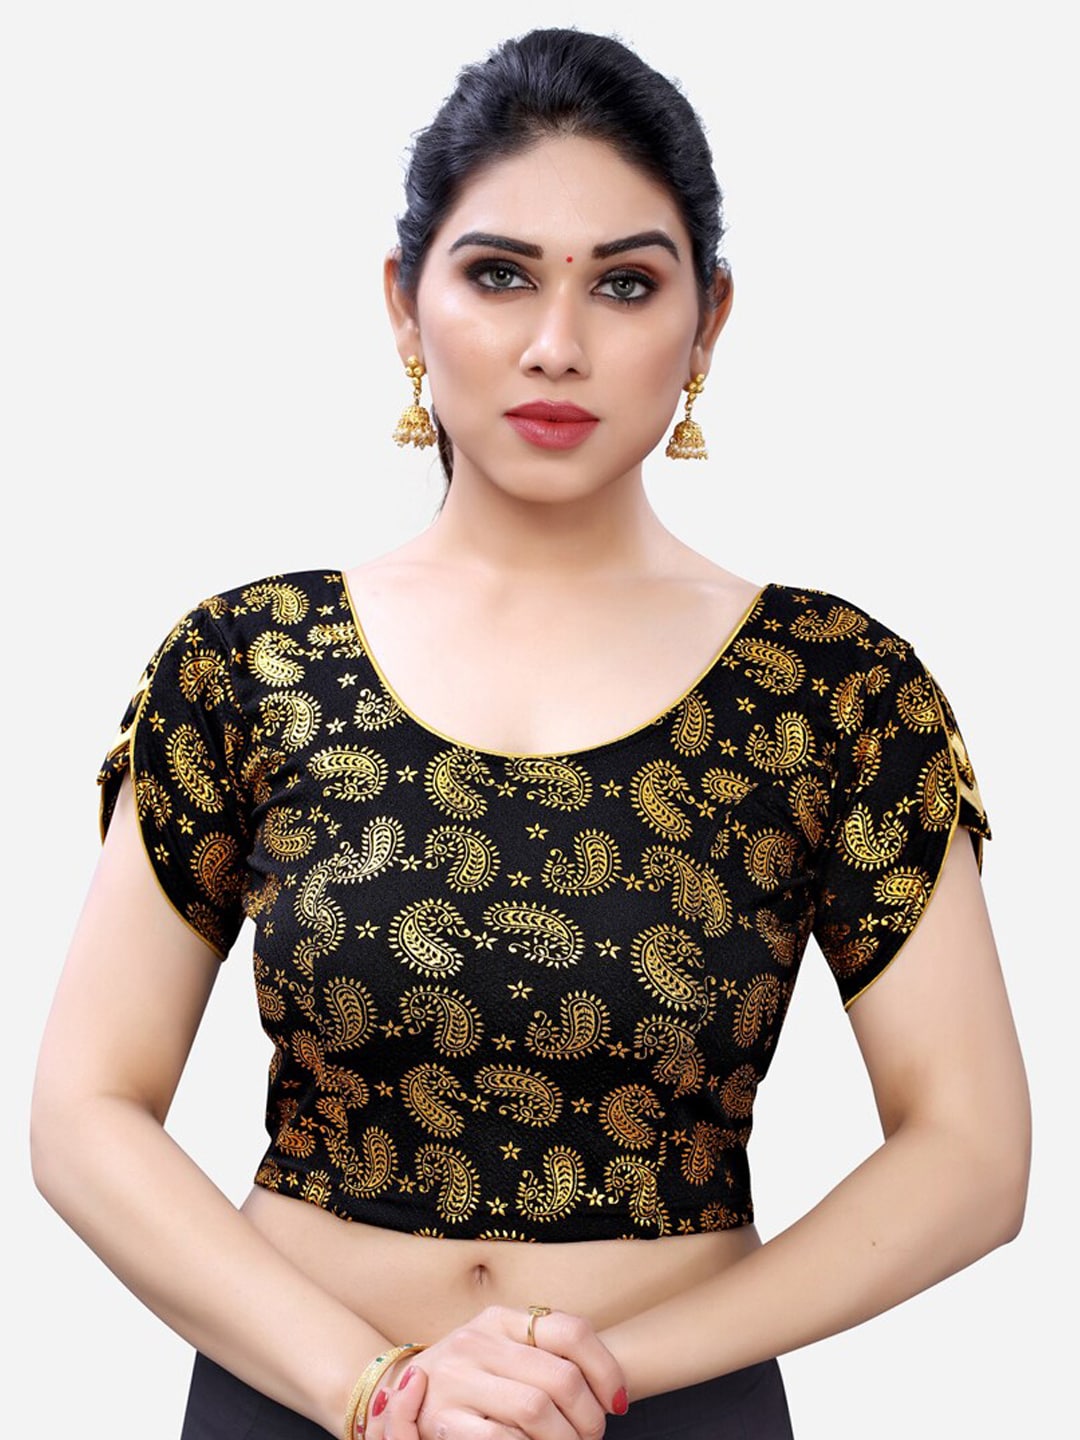 SIRIL Women Black & Gold-Coloured Foil Printed Saree Blouse Price in India